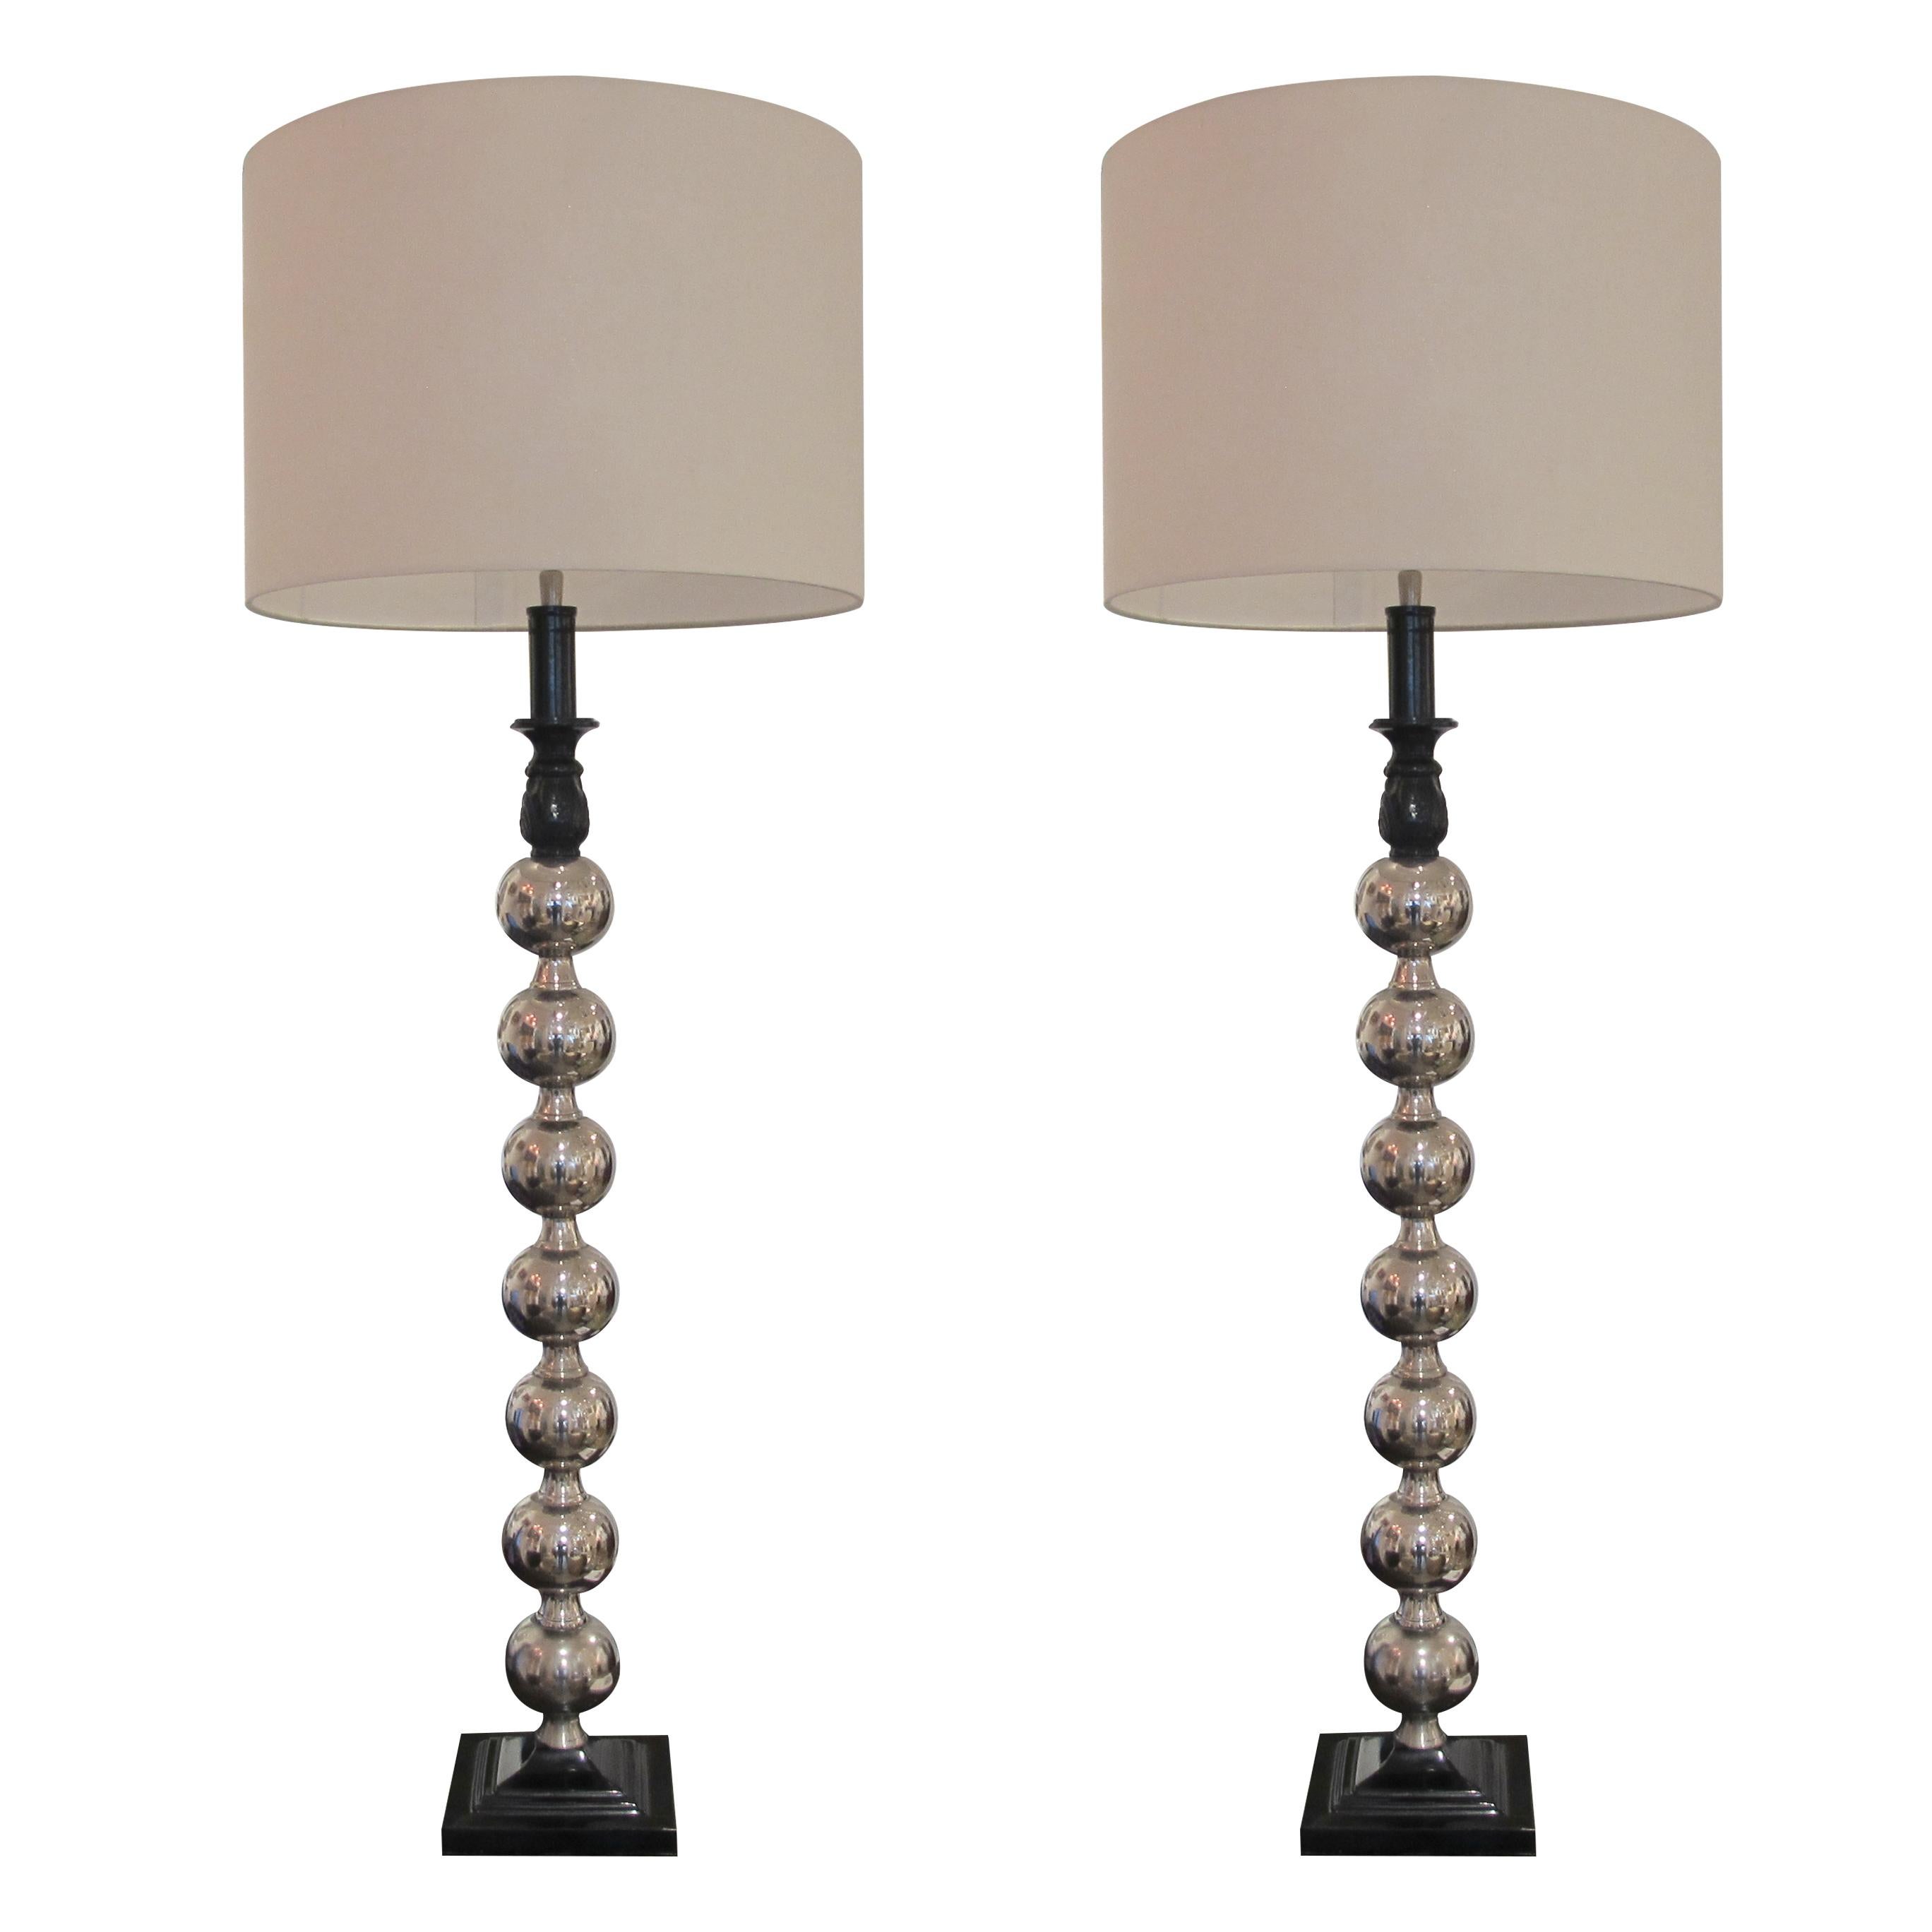 An elegant pair of 1960s Mid-Century Modern lamps with polished chrome spheres or orbs in the style of George Kovacs. The lamps are very versatile and can be used as either table or floor lamps and will suit many interior styles. The metal bases are